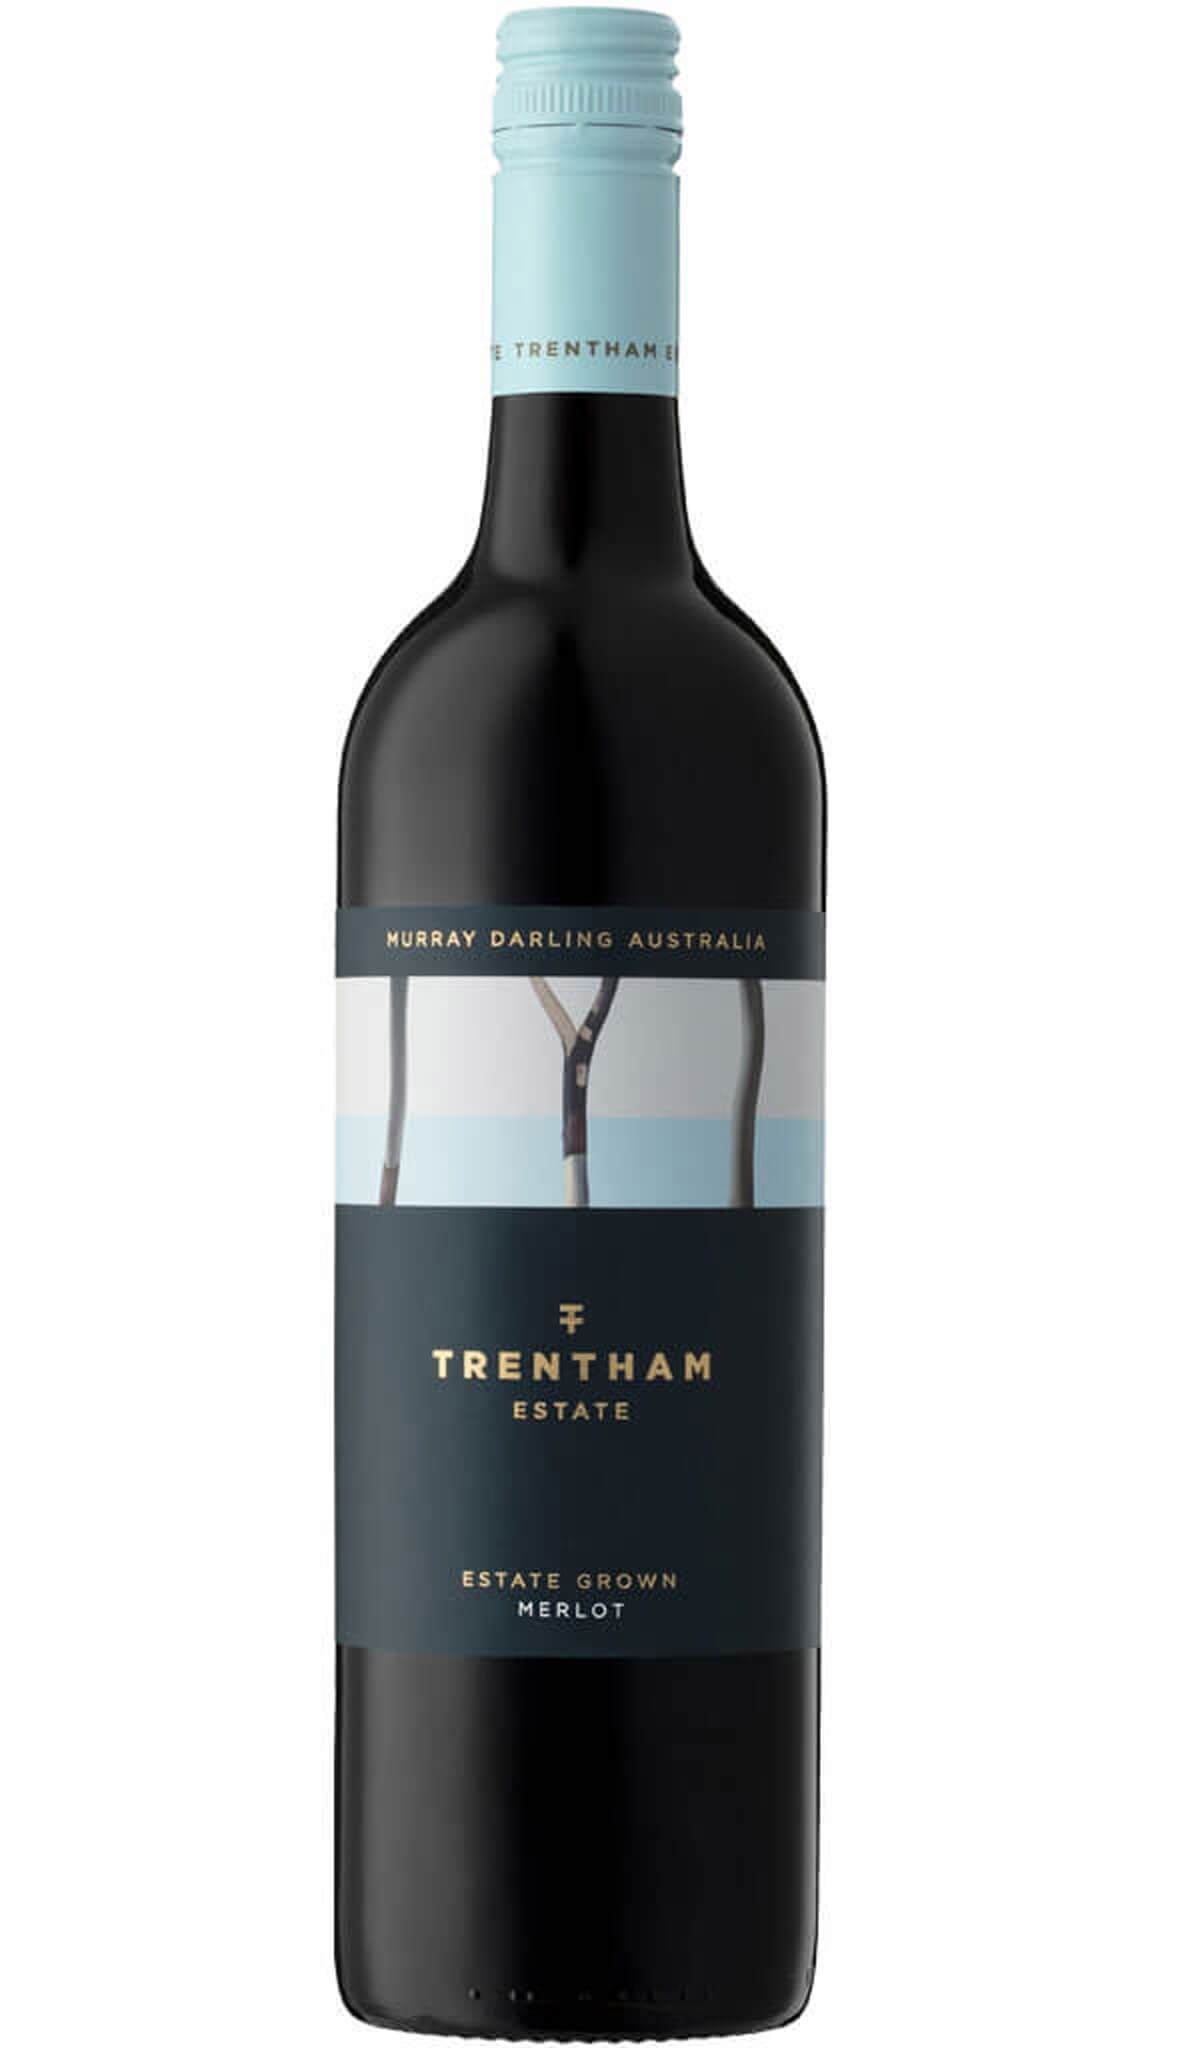 Find out more or buy Trentham Estate Merlot 2022 (Murray Darling) online at Wine Sellers Direct - Australia’s independent liquor specialists.